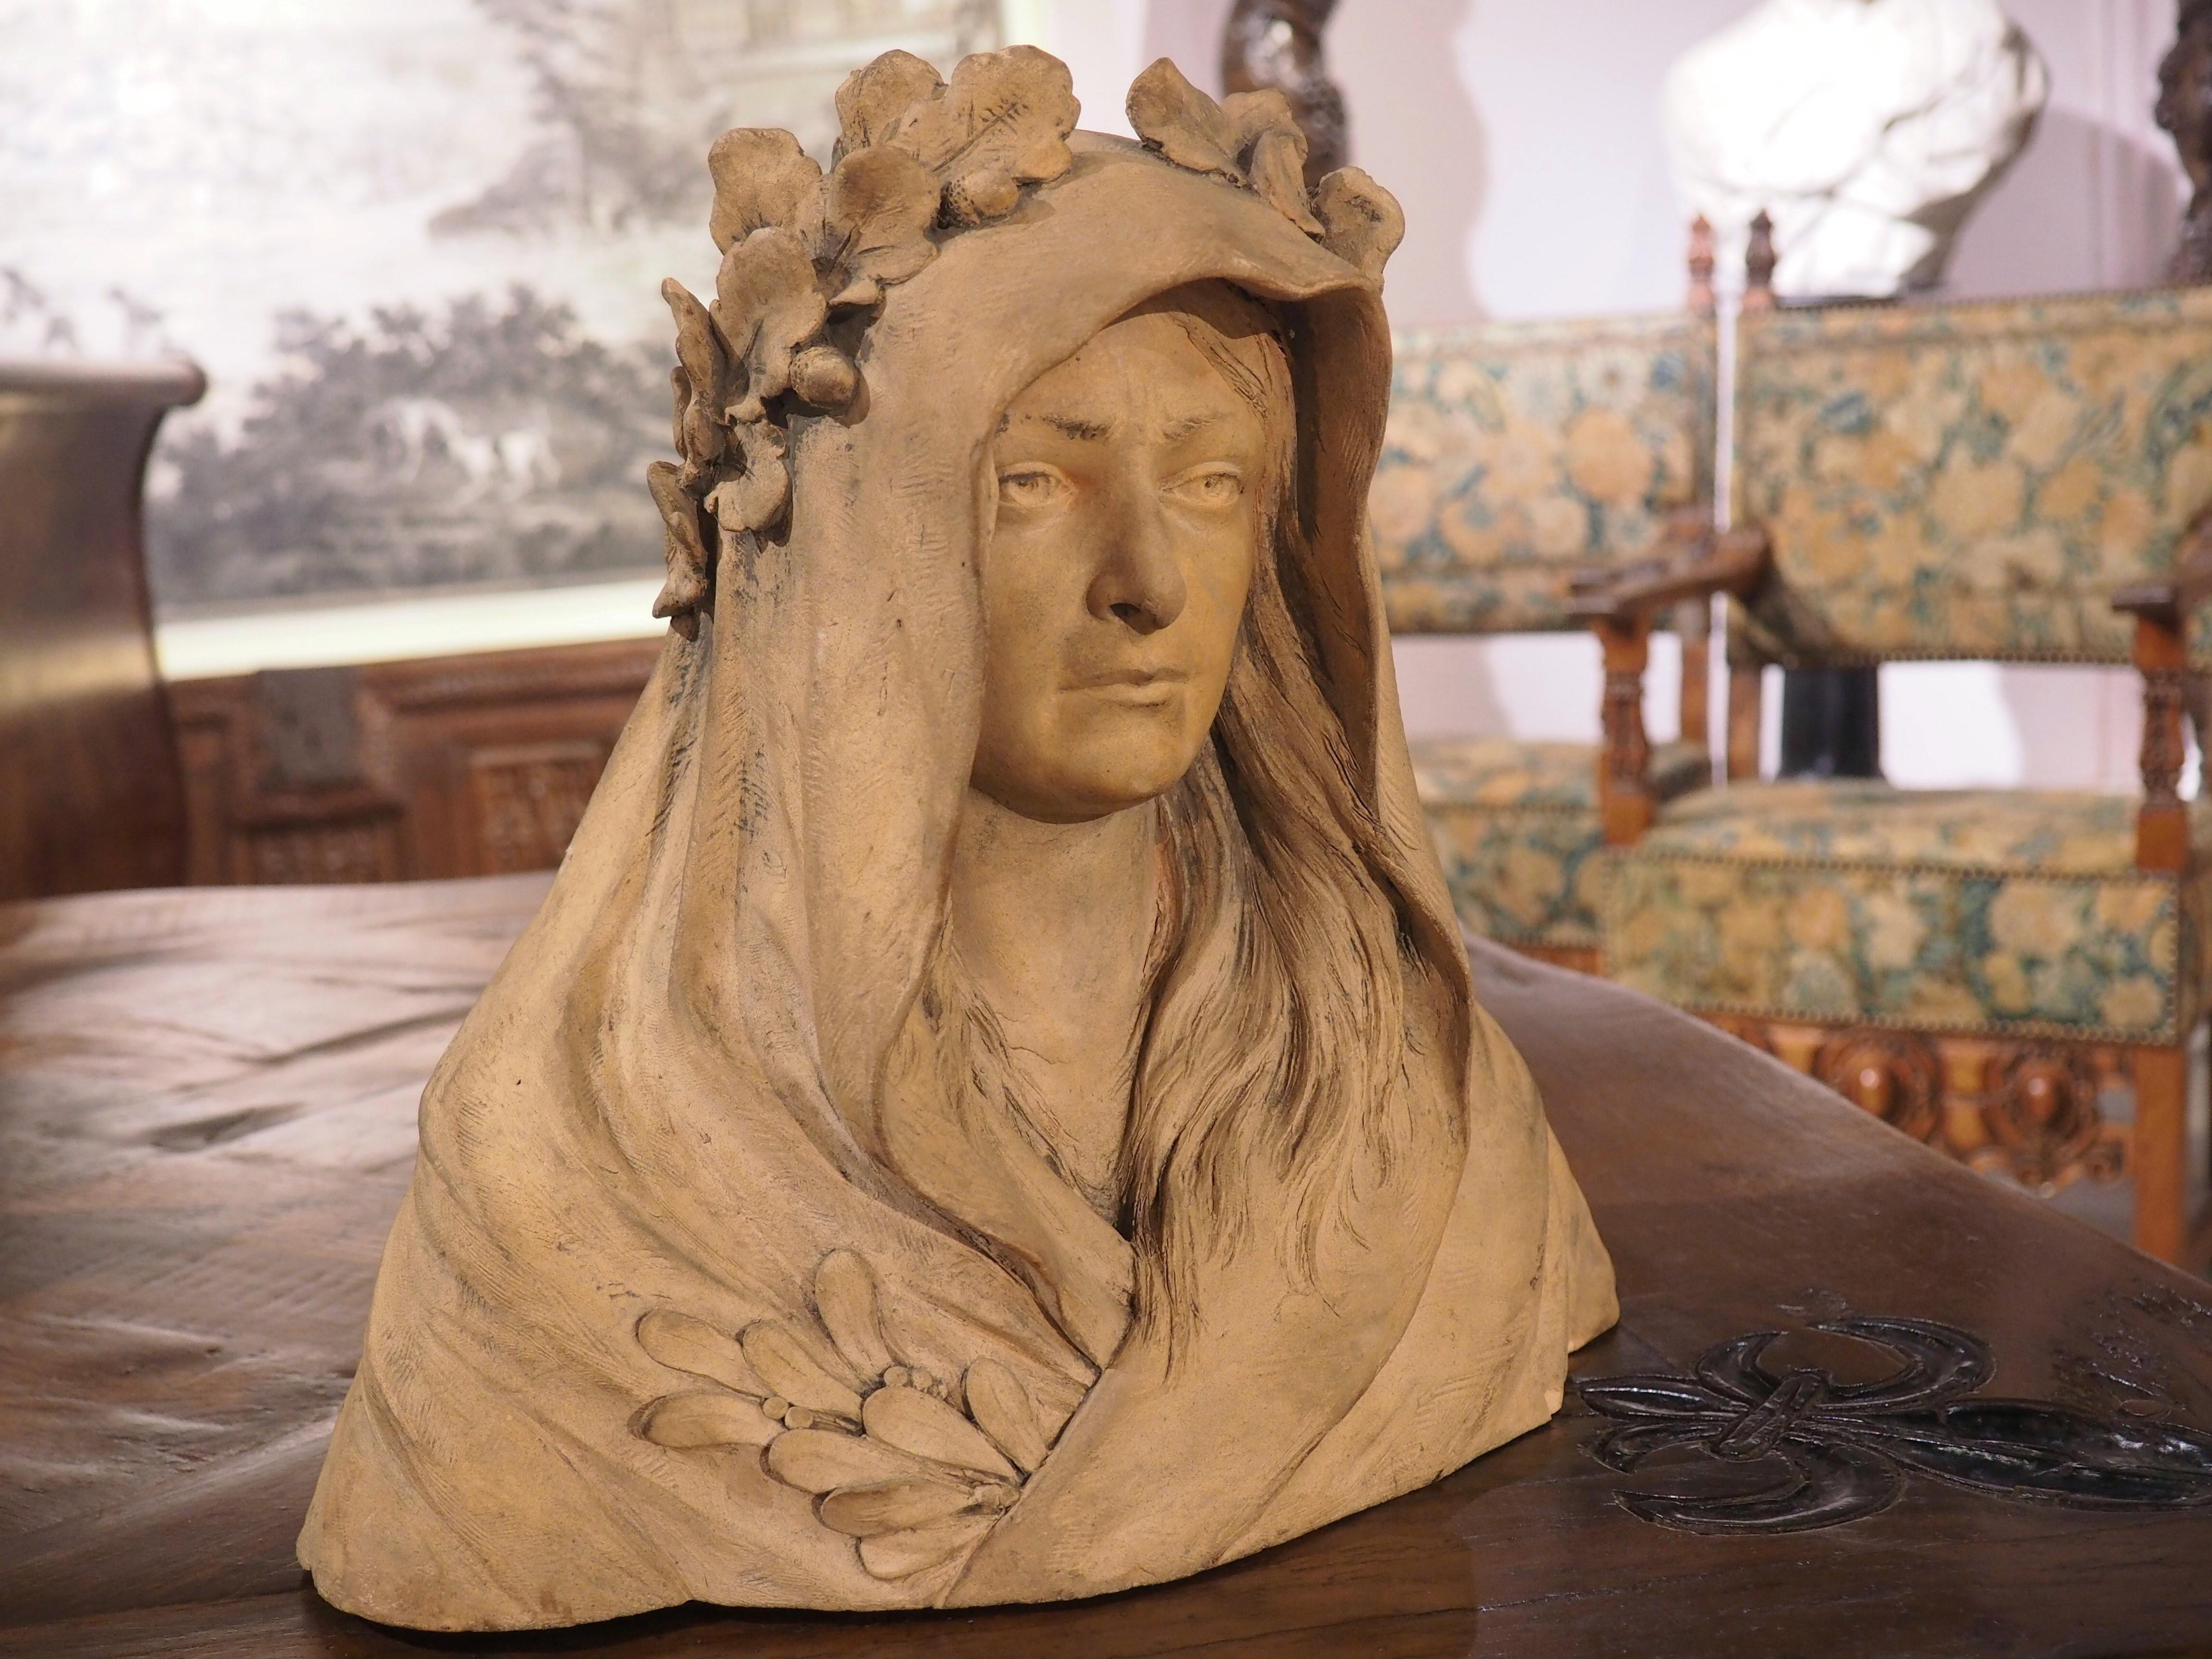 This terracotta bust of a woman has some exquisite details. Sculpted in France in the late 1800’s to early 1900’s, our subject has long, straight hair emerging from underneath a hooded article of clothing, possibly a cardinal cloak, which was